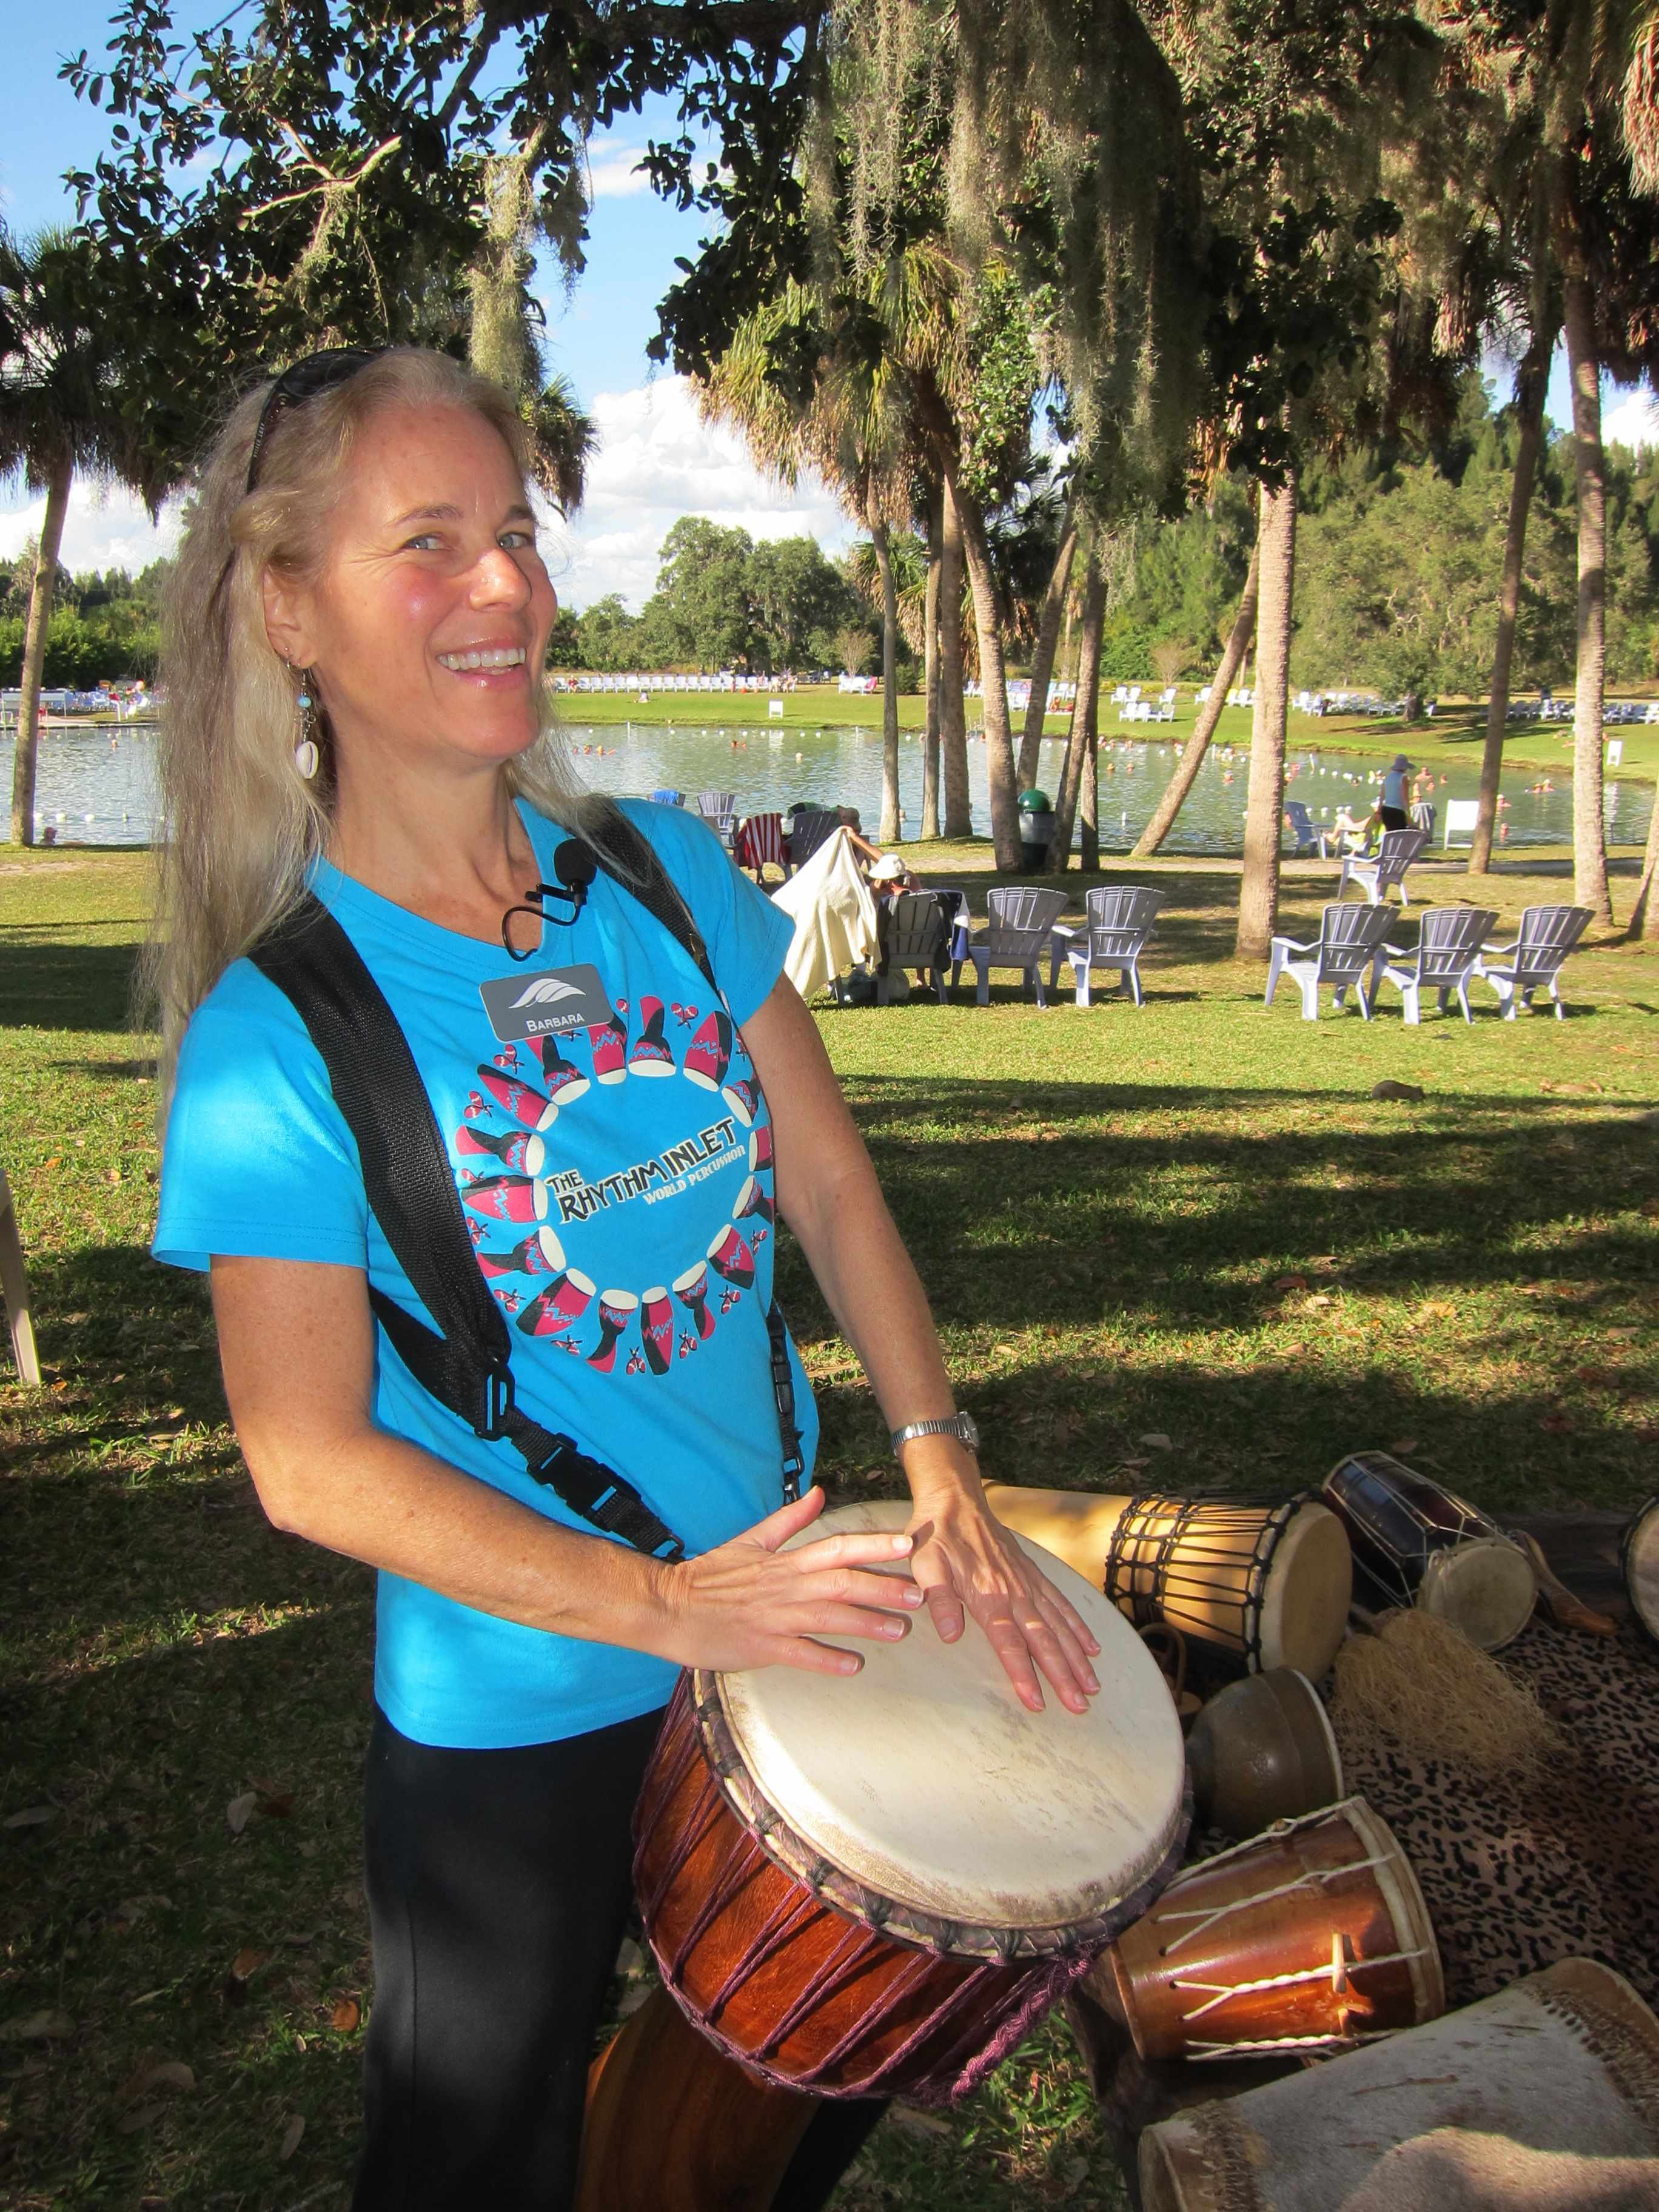 BG at WMS with her Djembe